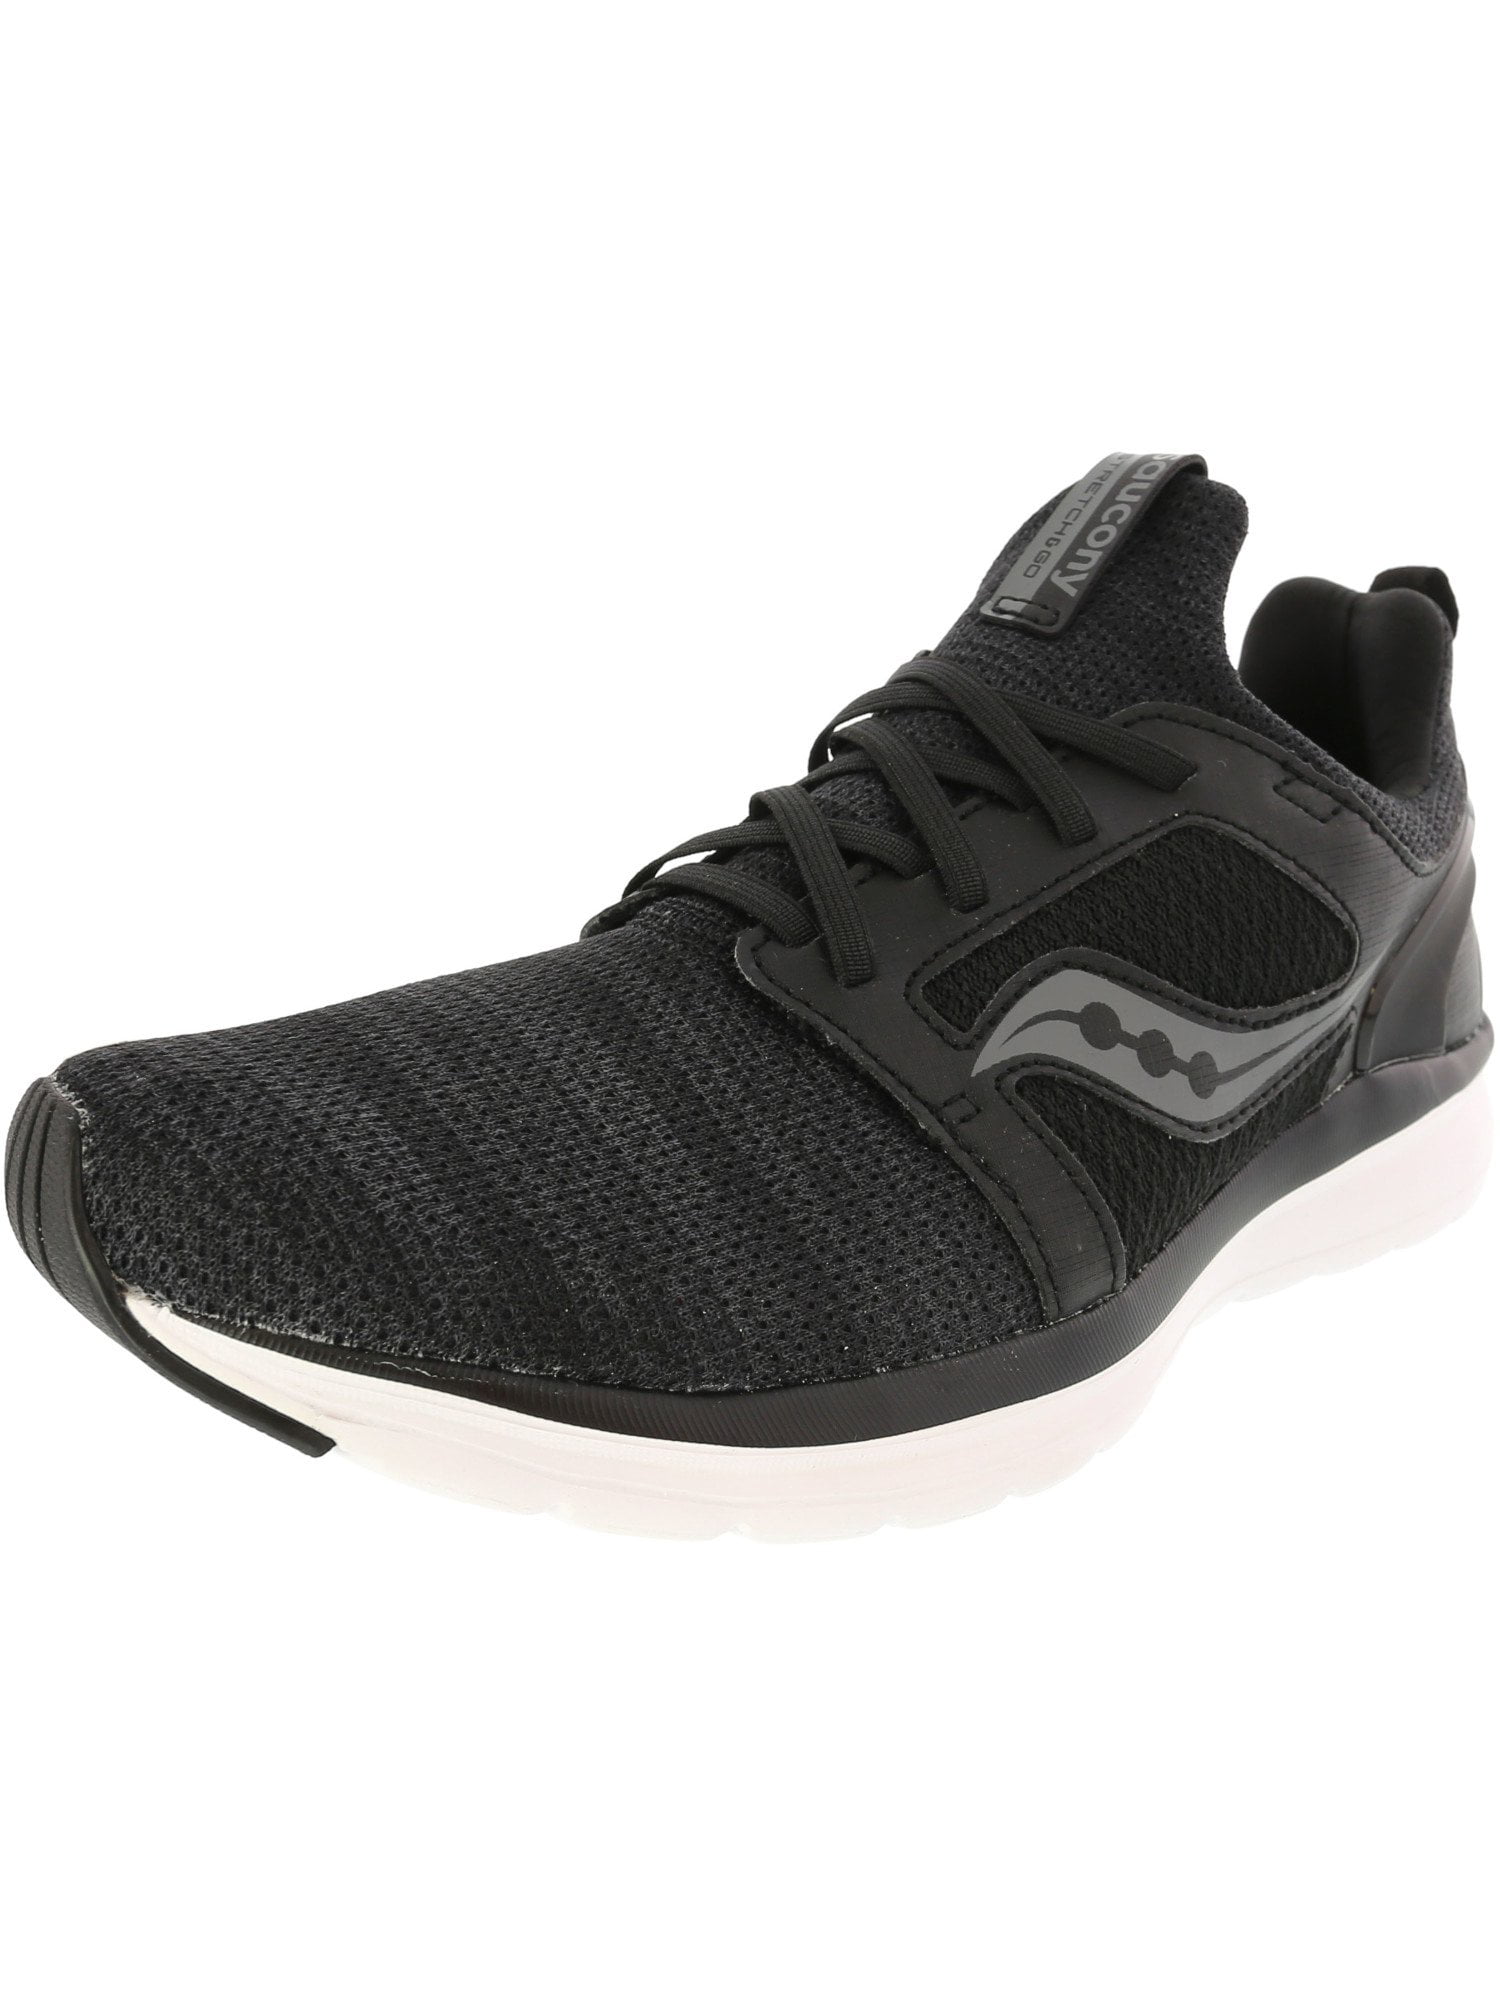 Saucony - Saucony Men's Stretch And Go Ease Running Shoe ...